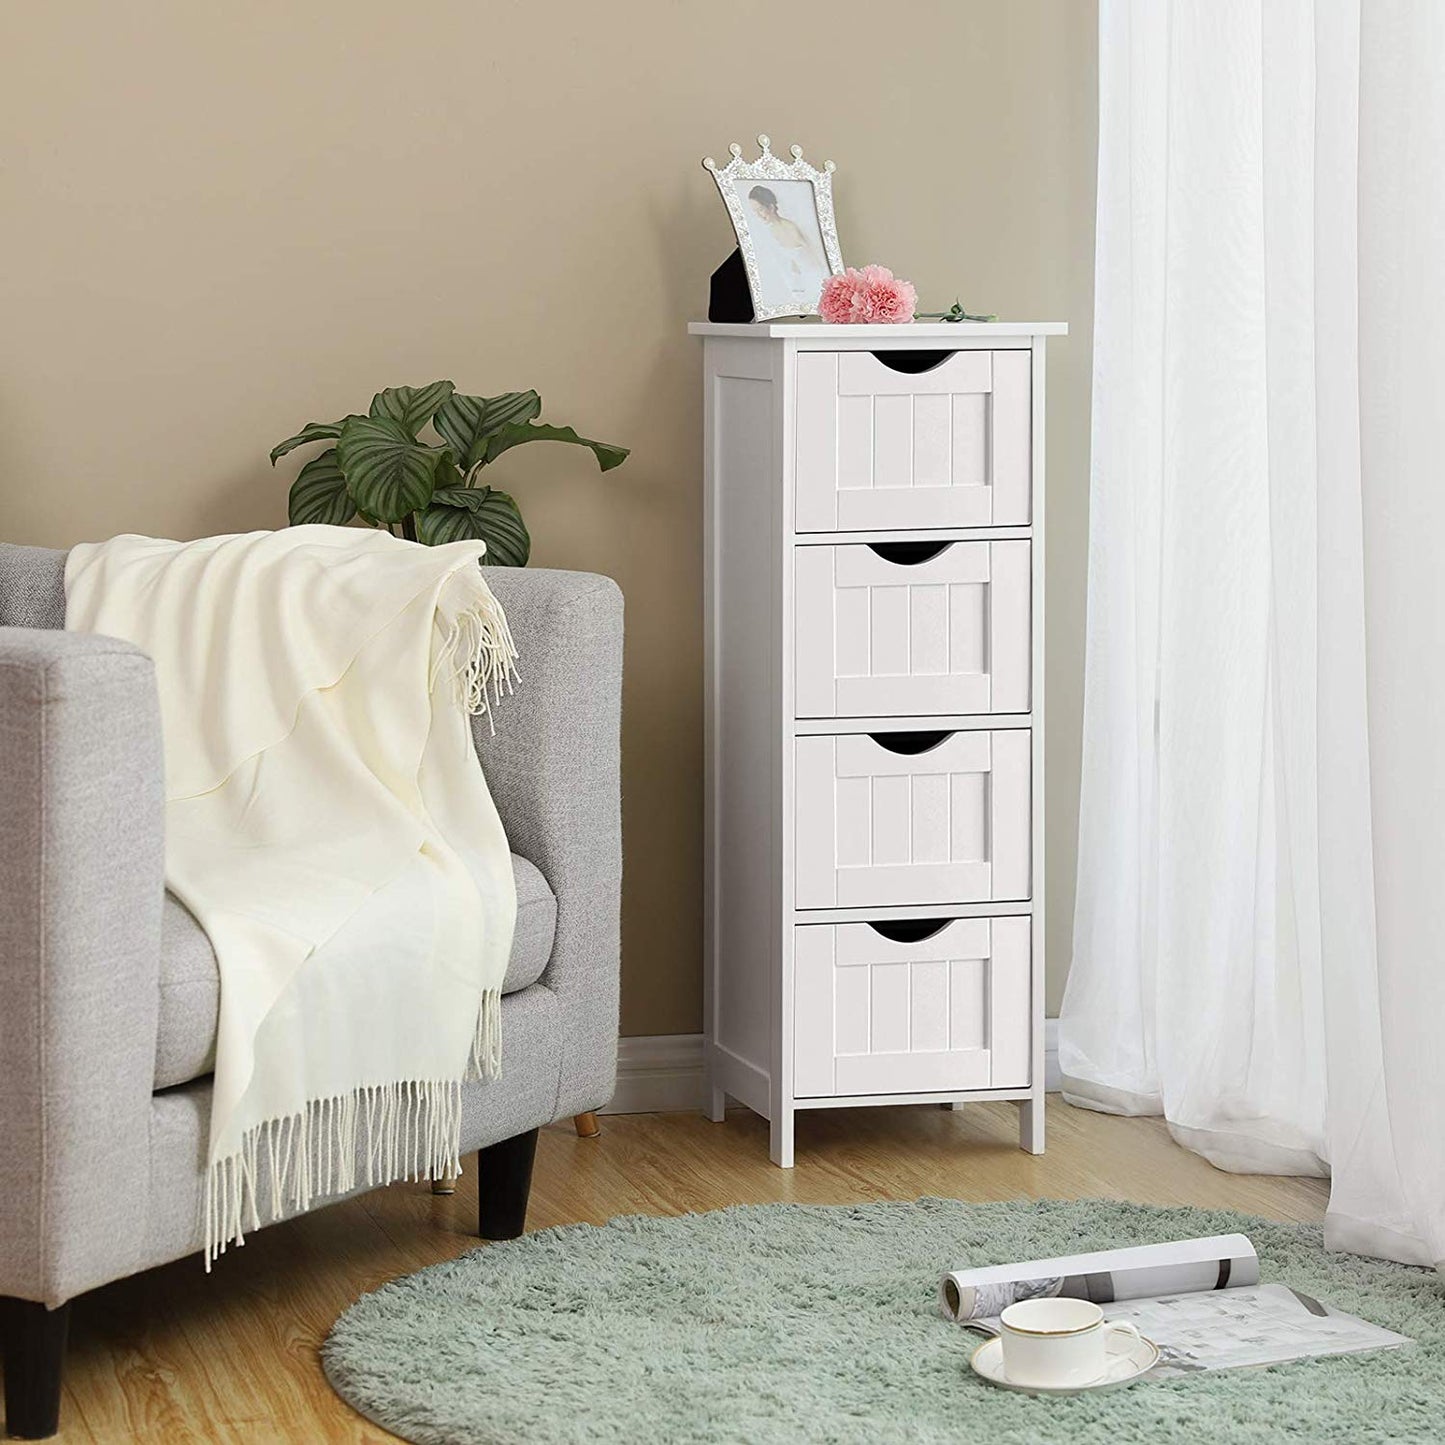 Freestanding Storage Cabinet with Drawers, White